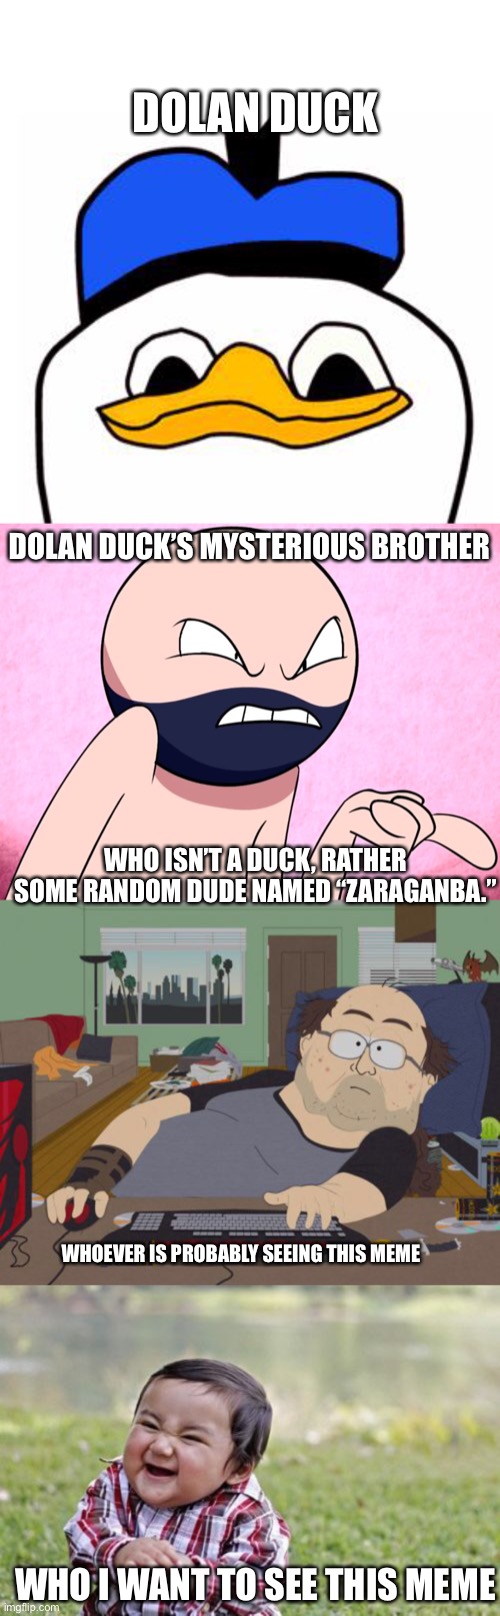 Multiple Perspectives | DOLAN DUCK; DOLAN DUCK’S MYSTERIOUS BROTHER; WHO ISN’T A DUCK, RATHER SOME RANDOM DUDE NAMED “ZARAGANBA.”; WHOEVER IS PROBABLY SEEING THIS MEME; WHO I WANT TO SEE THIS MEME | image tagged in dolanpls,danger dolan brother,memes,rpg fan,evil toddler | made w/ Imgflip meme maker